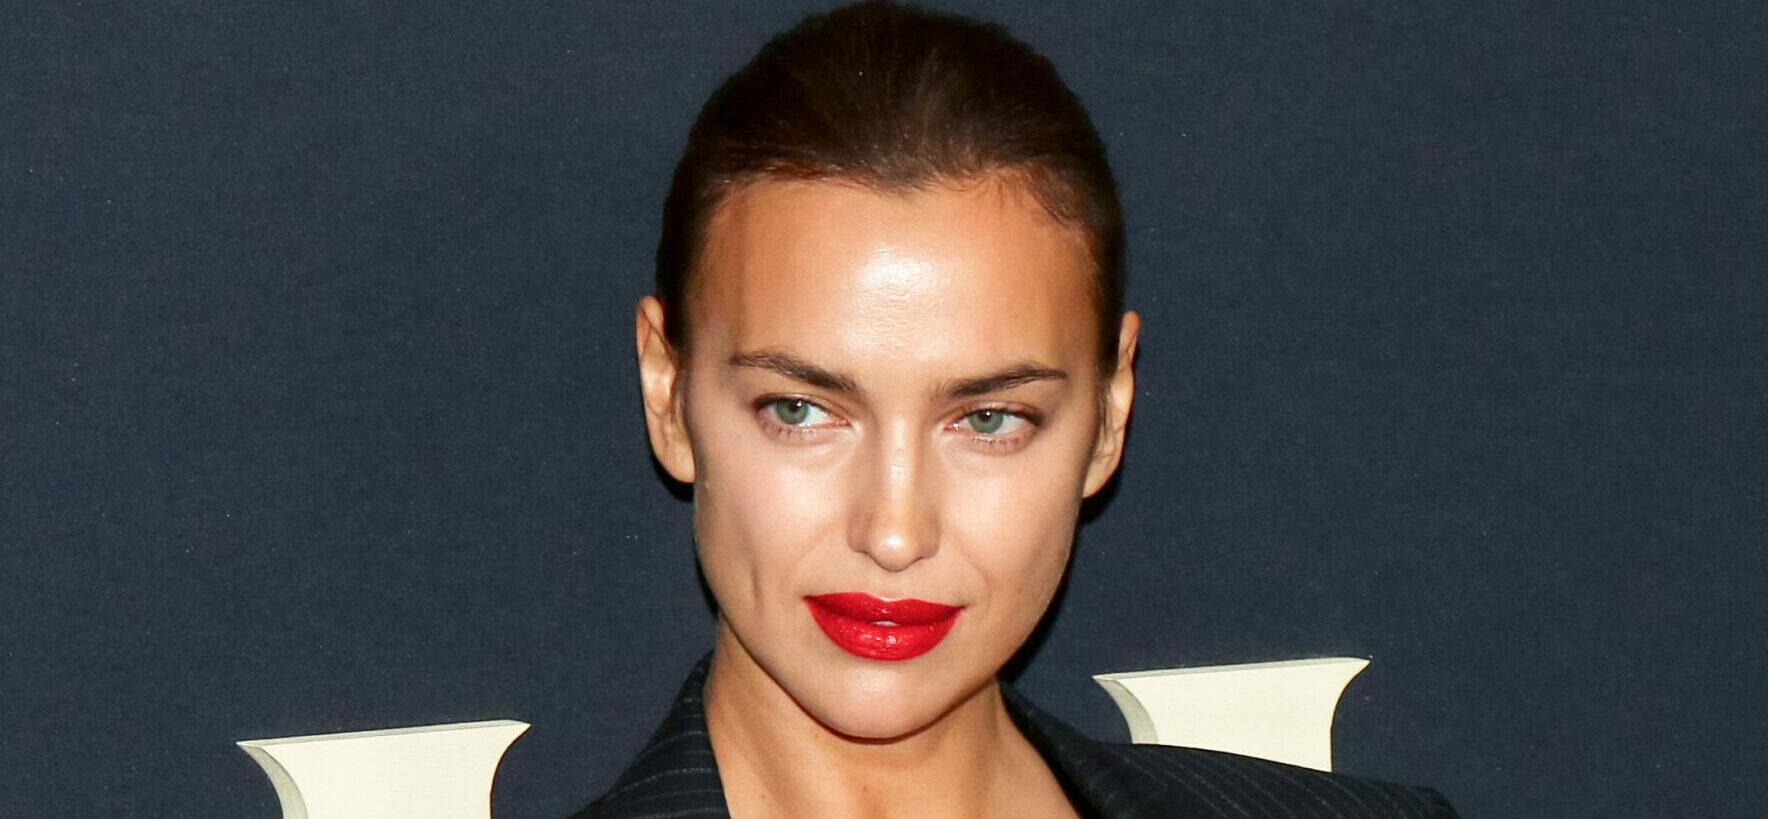 Irina Shayk Flaunts Her Physique In THIS Jaw-Dropping Outfit For Moroccan Vacation